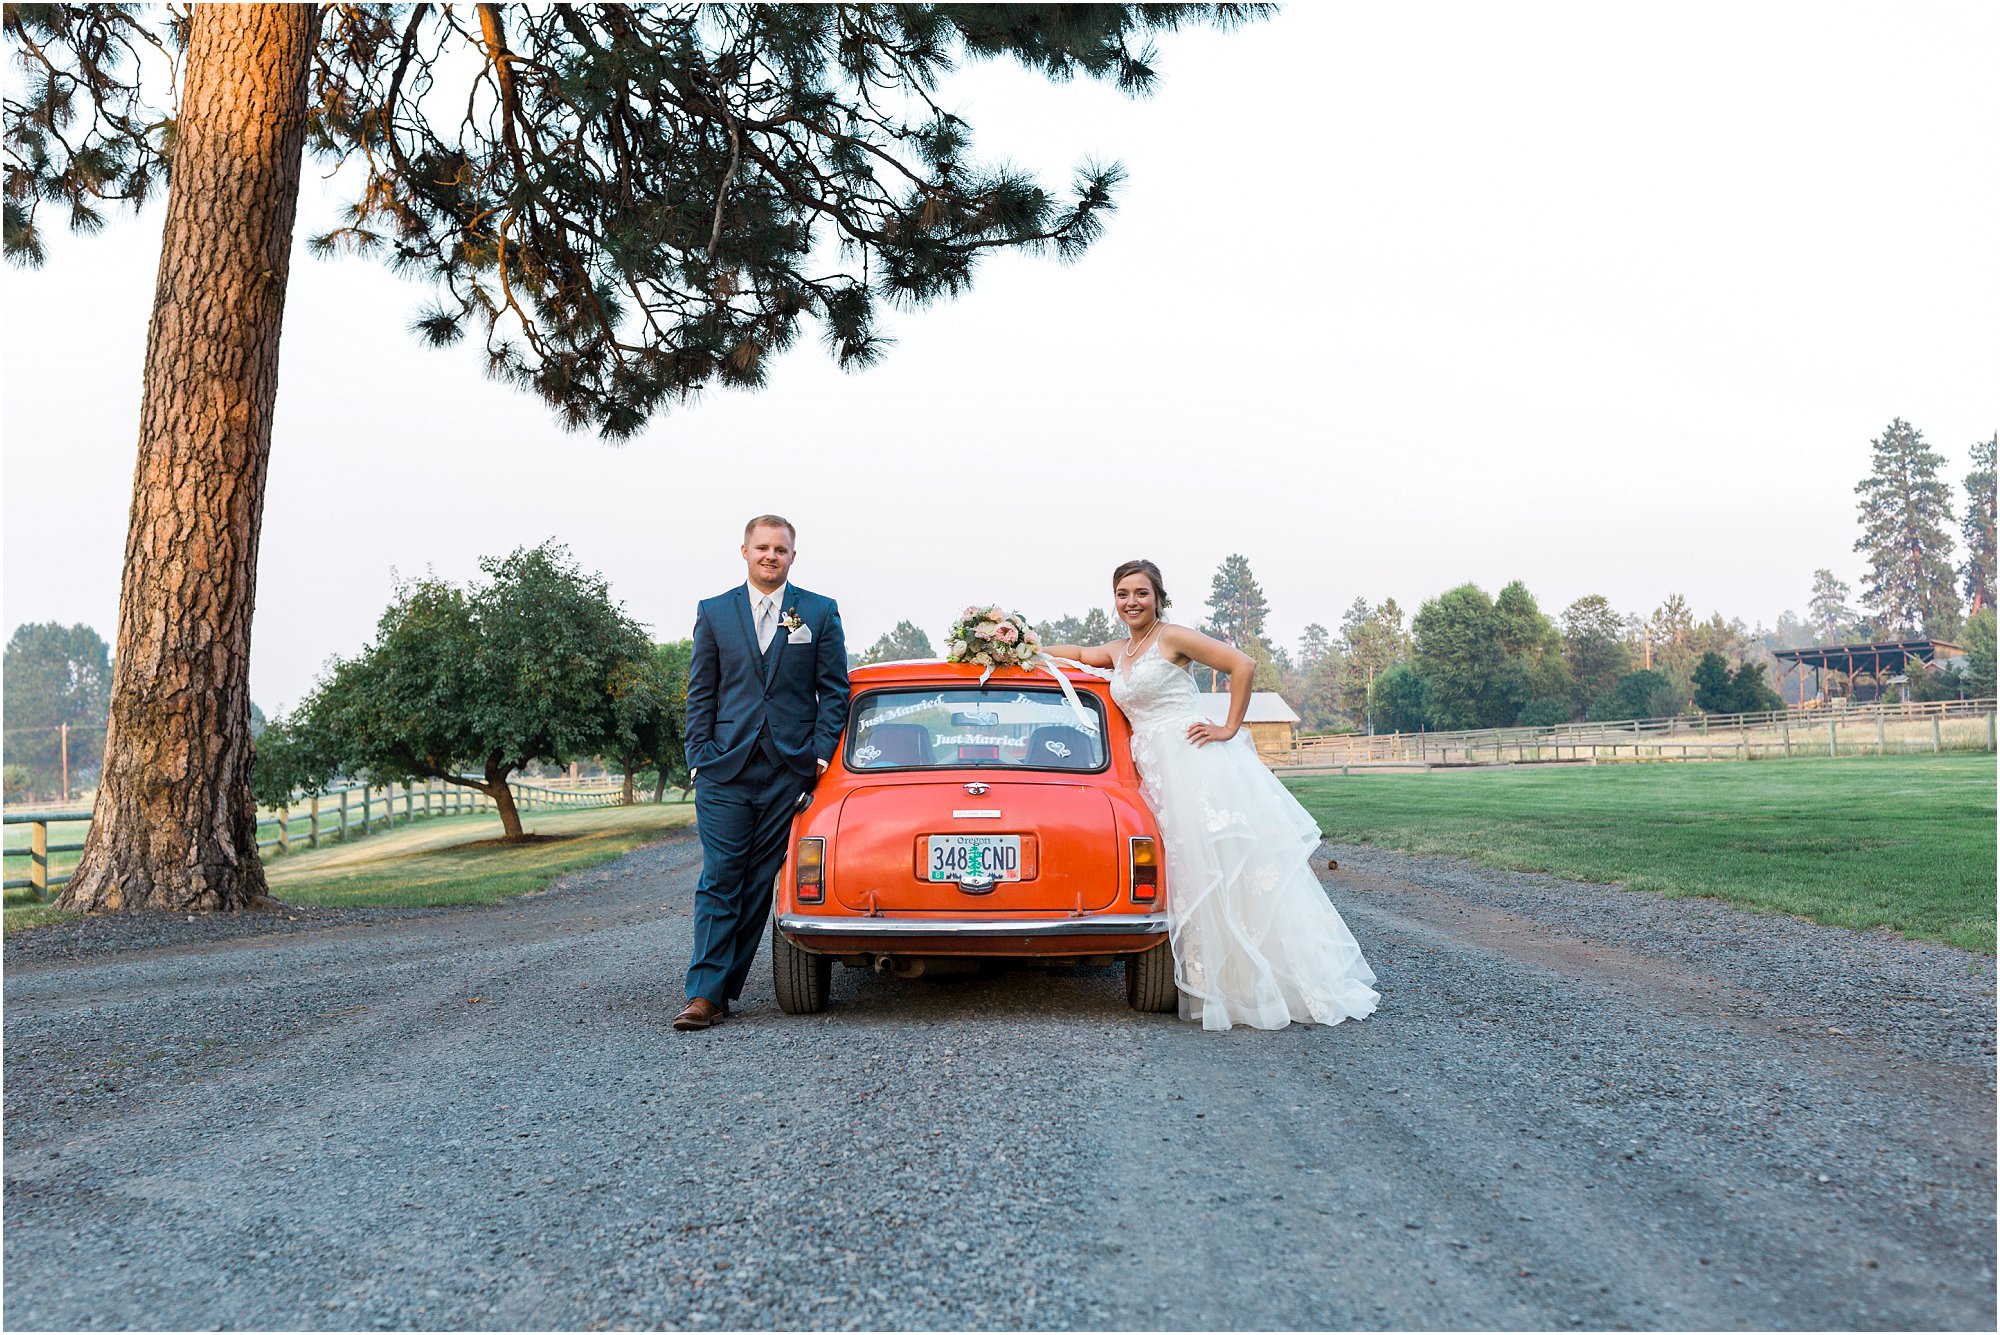 A couple poses in front of their fun wedding day getaway car at Bend, Oregon's Rock Springs Ranch wedding venue. | Erica Swantek Photography